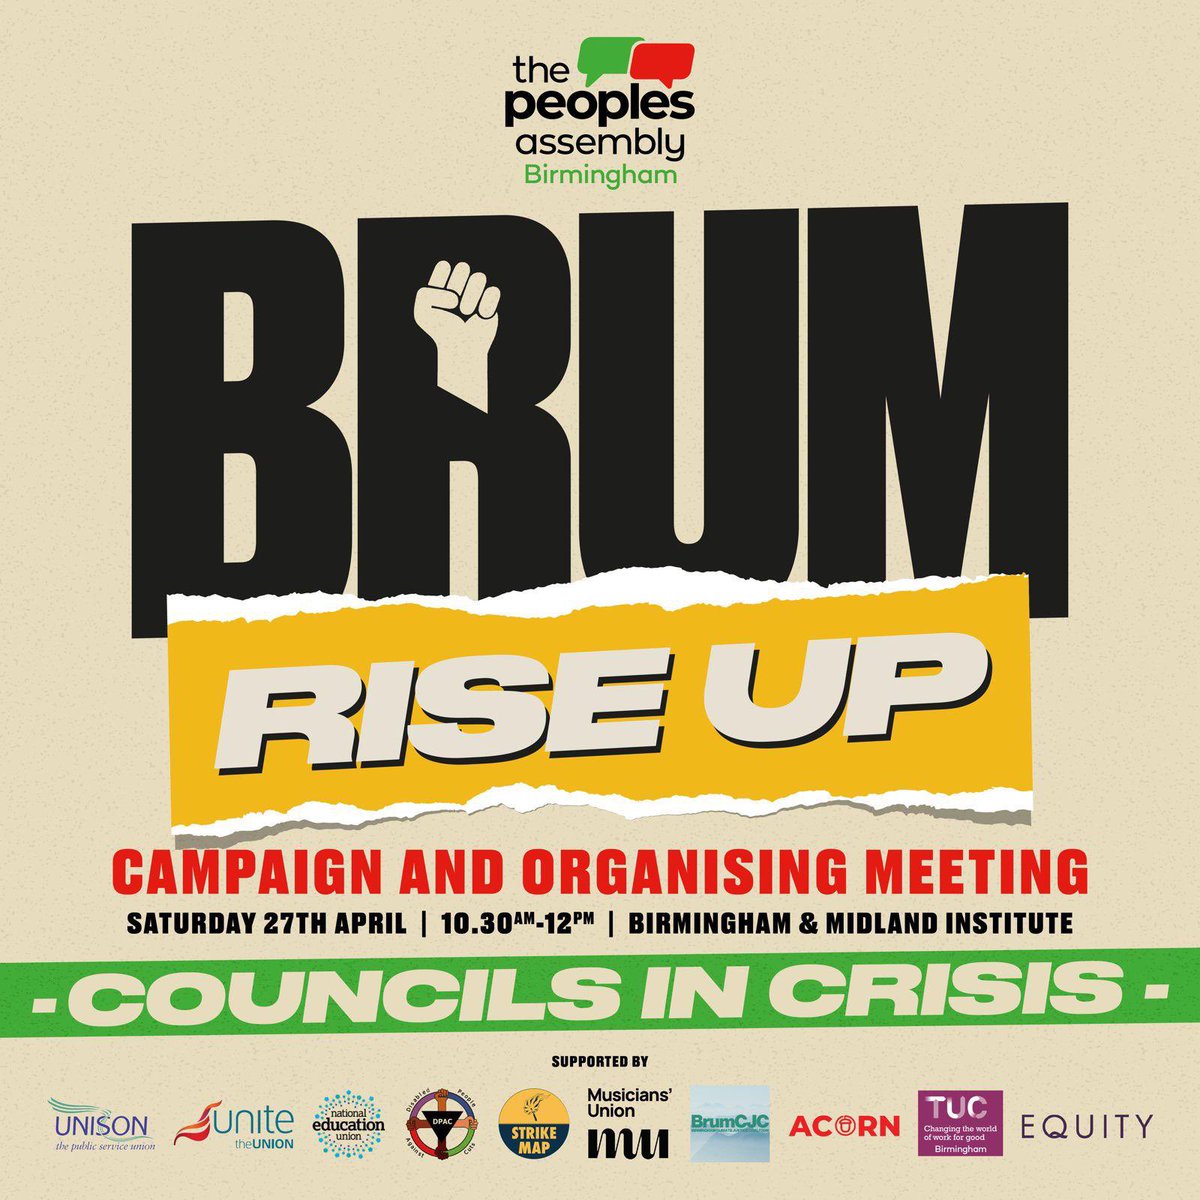 If you live/work in #Birmingham then come along to have your say on the massive cuts being inflicted on our city.
Saturday 27th April 10:30am to midday Birmingham Midland Institute.
Time to #FightBack and time for a #BrumRiseUp
#StopCouncilCuts demand proper funding for services